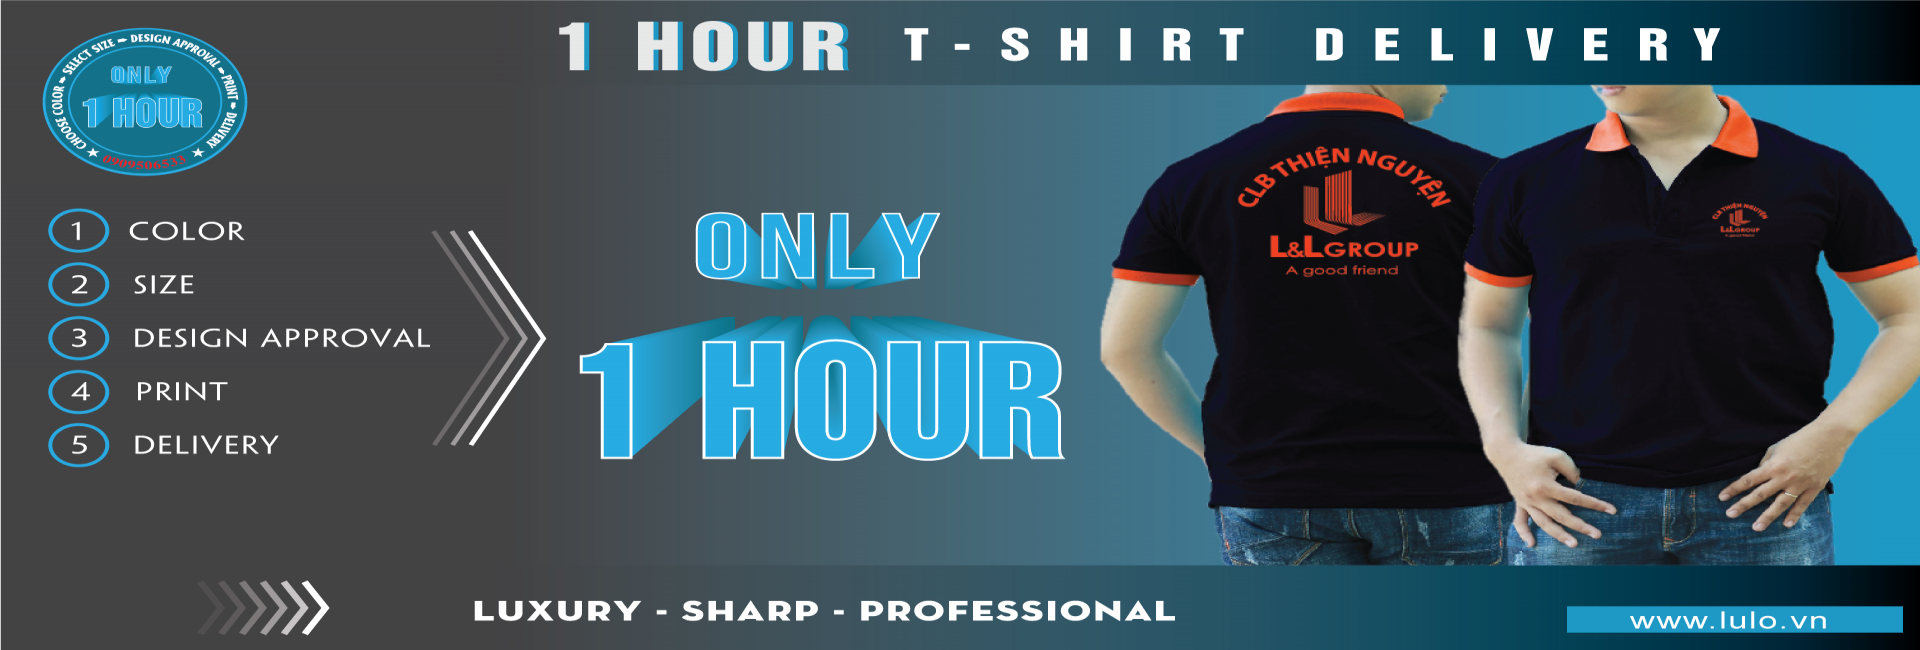 t-shirt 1 hour delivery